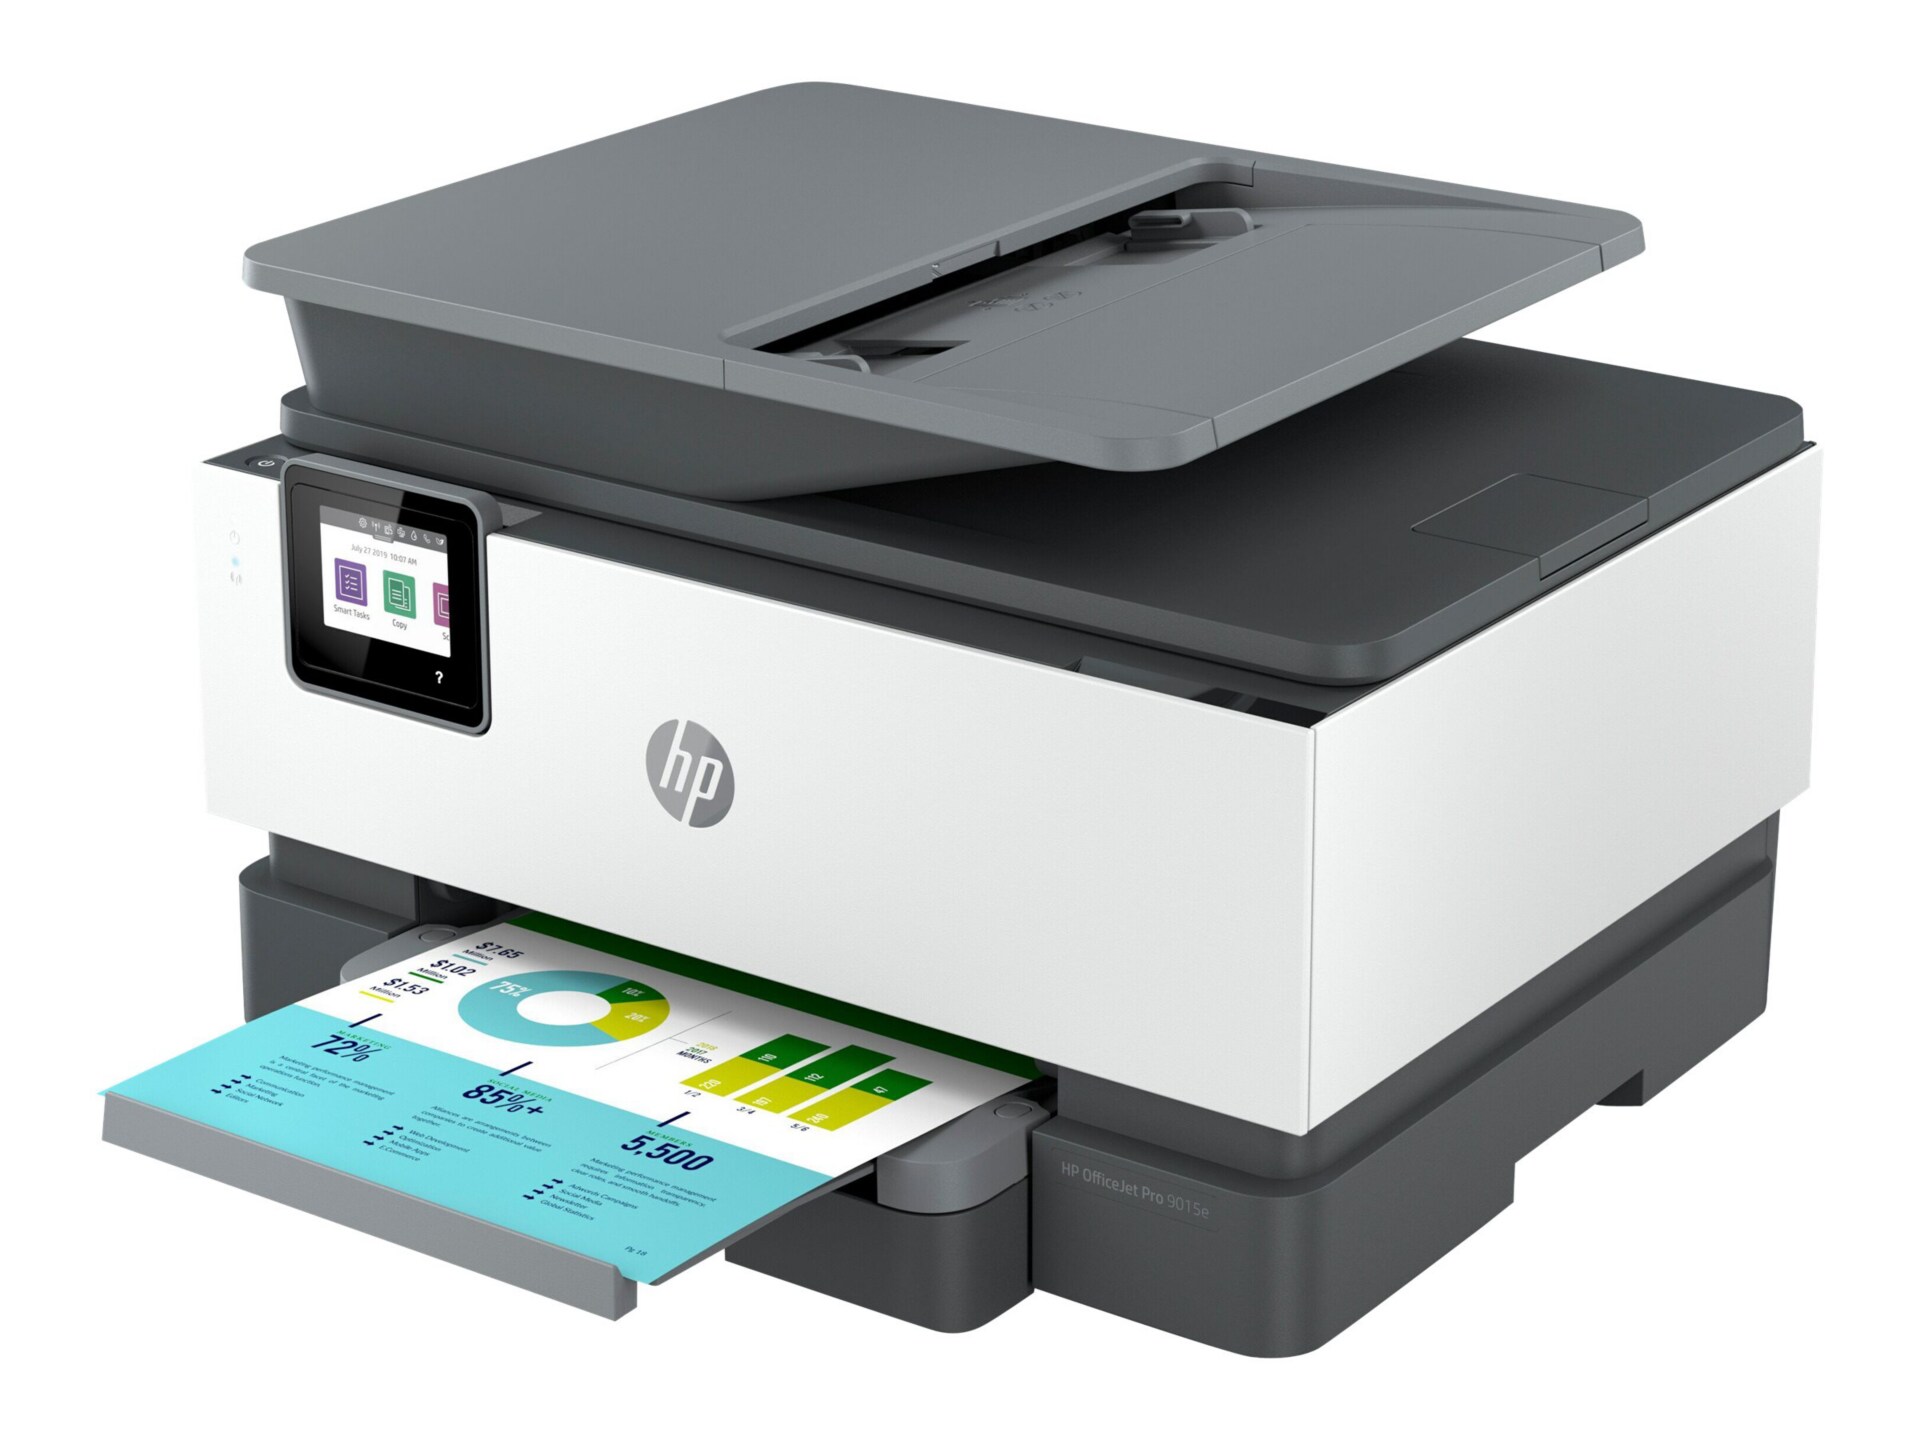 HP Officejet Pro 9015e All-in-One - multifunction printer - color - HP Ink eligible - 1G5L3A#B1H - All-in-One Printers - CDW.com